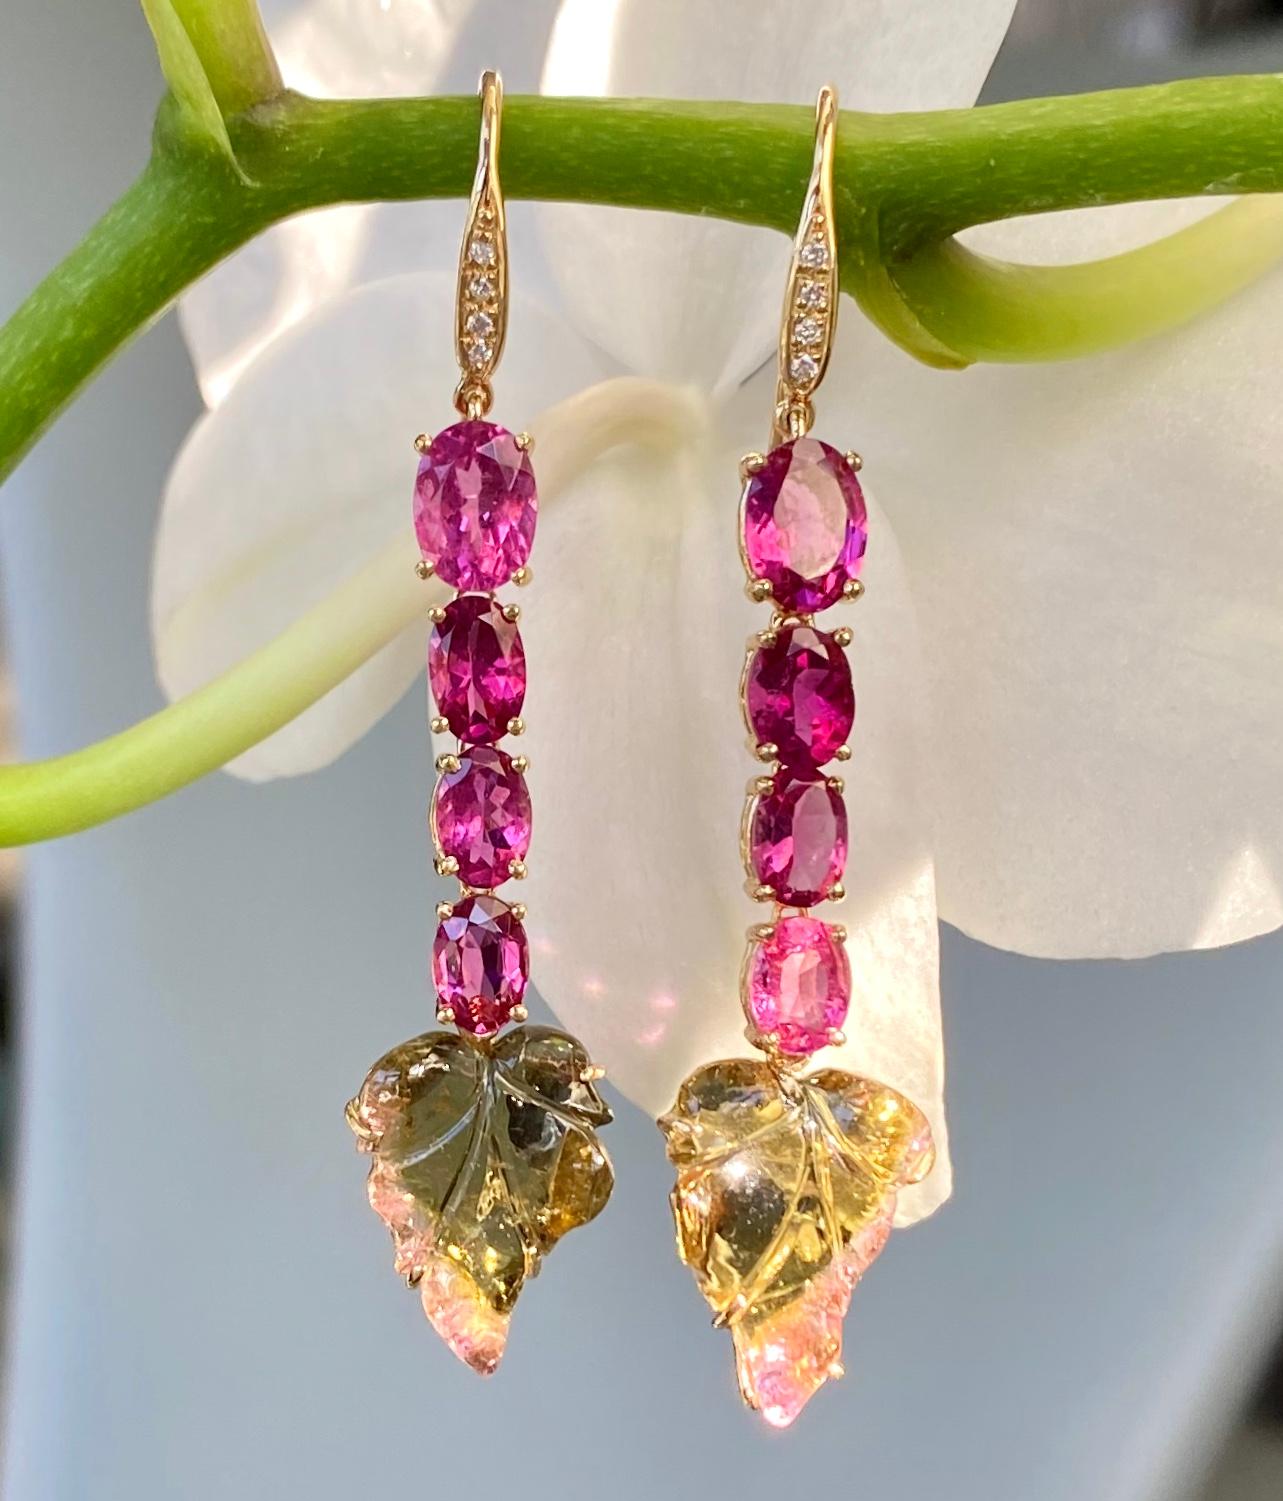 Oval pink tourmalines, carved bicolor tourmaline leaves and diamond earrings, handcrafted in 18 karat yellow gold.

These beautiful dangle earrings of vibrant pink and unique carved bicolor leaves are in bloom, perfect for the spring and summer